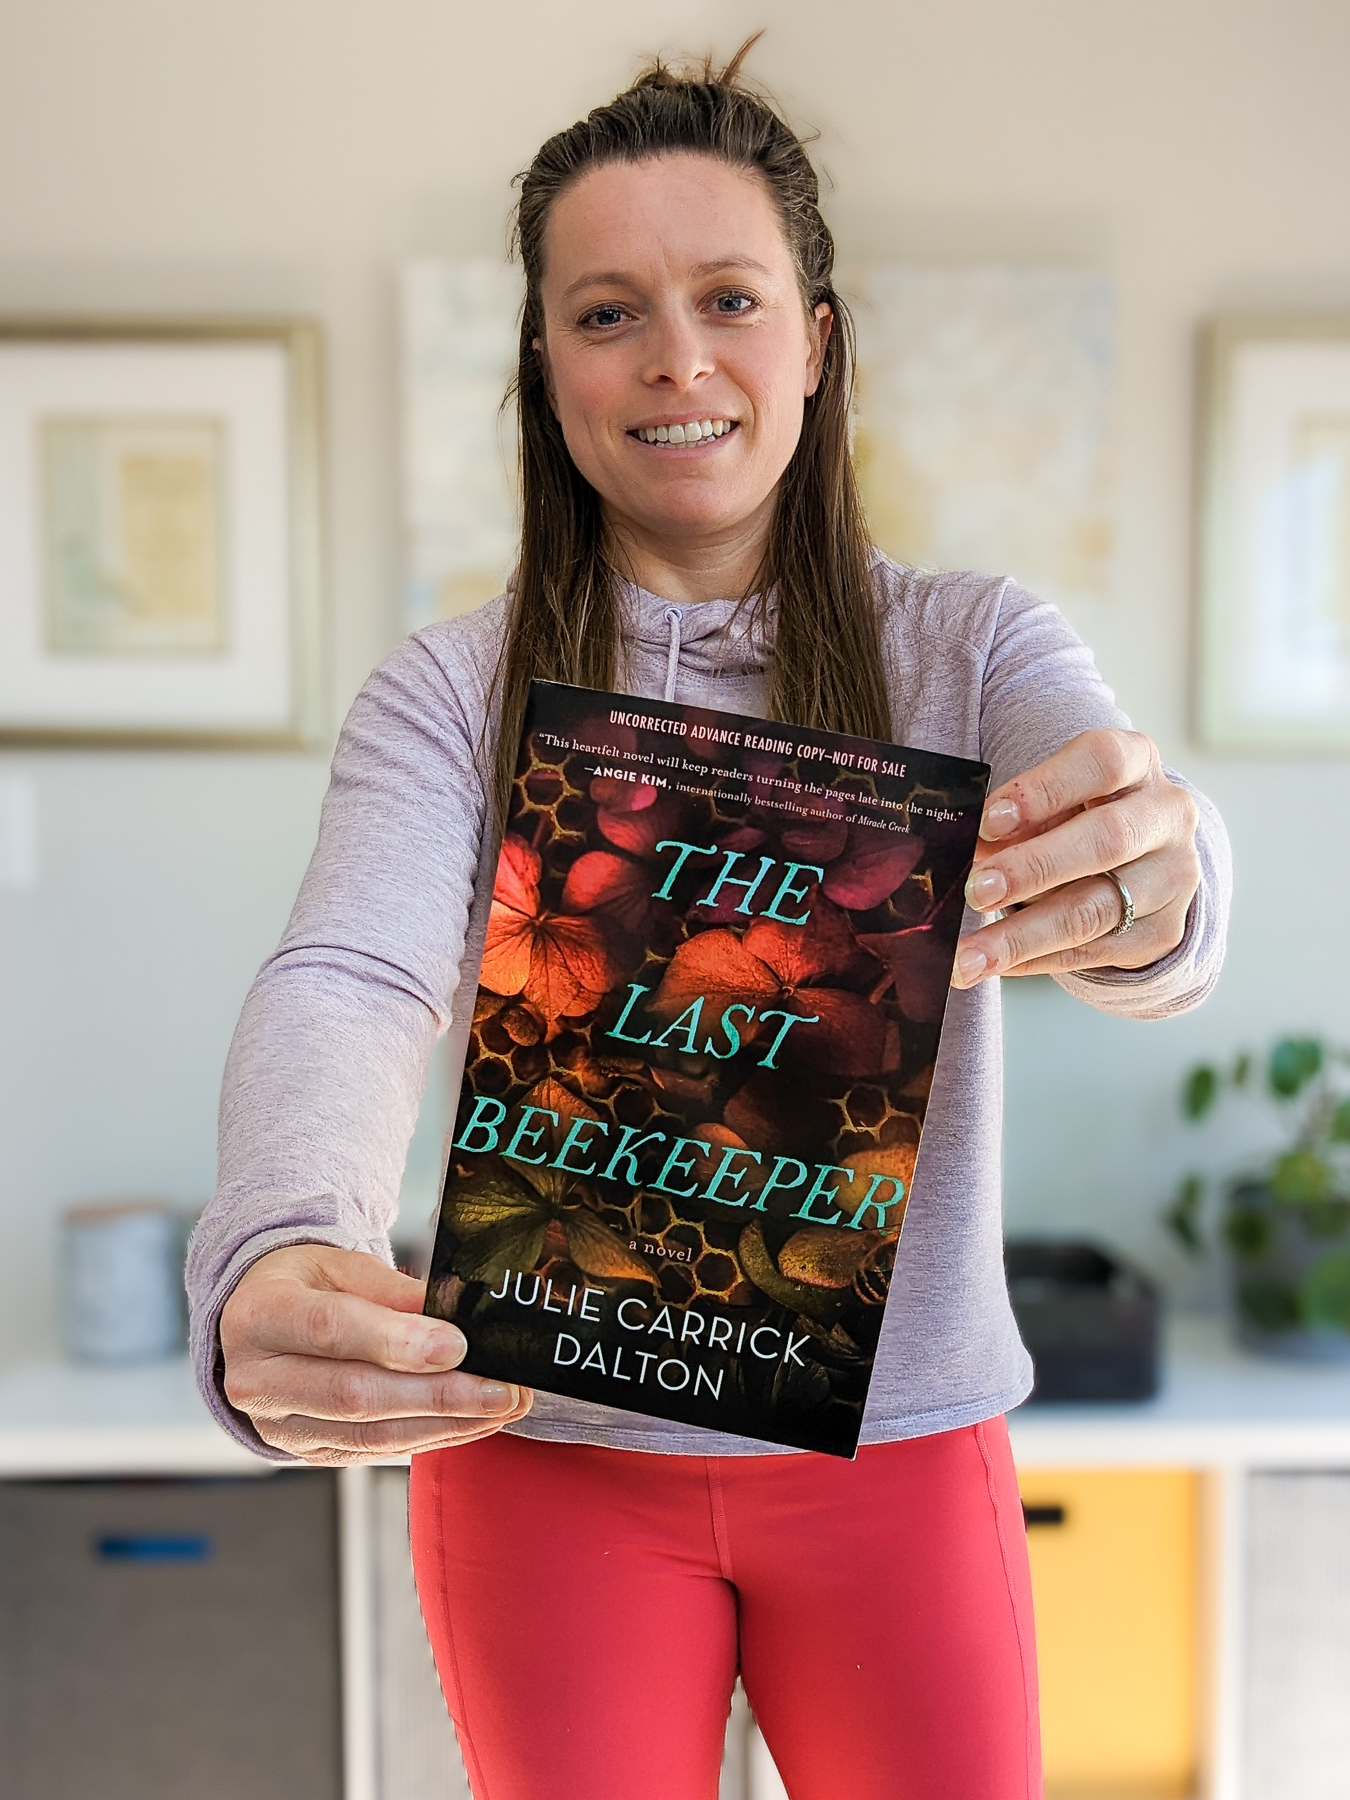 Book Review of The Last Beekeeper